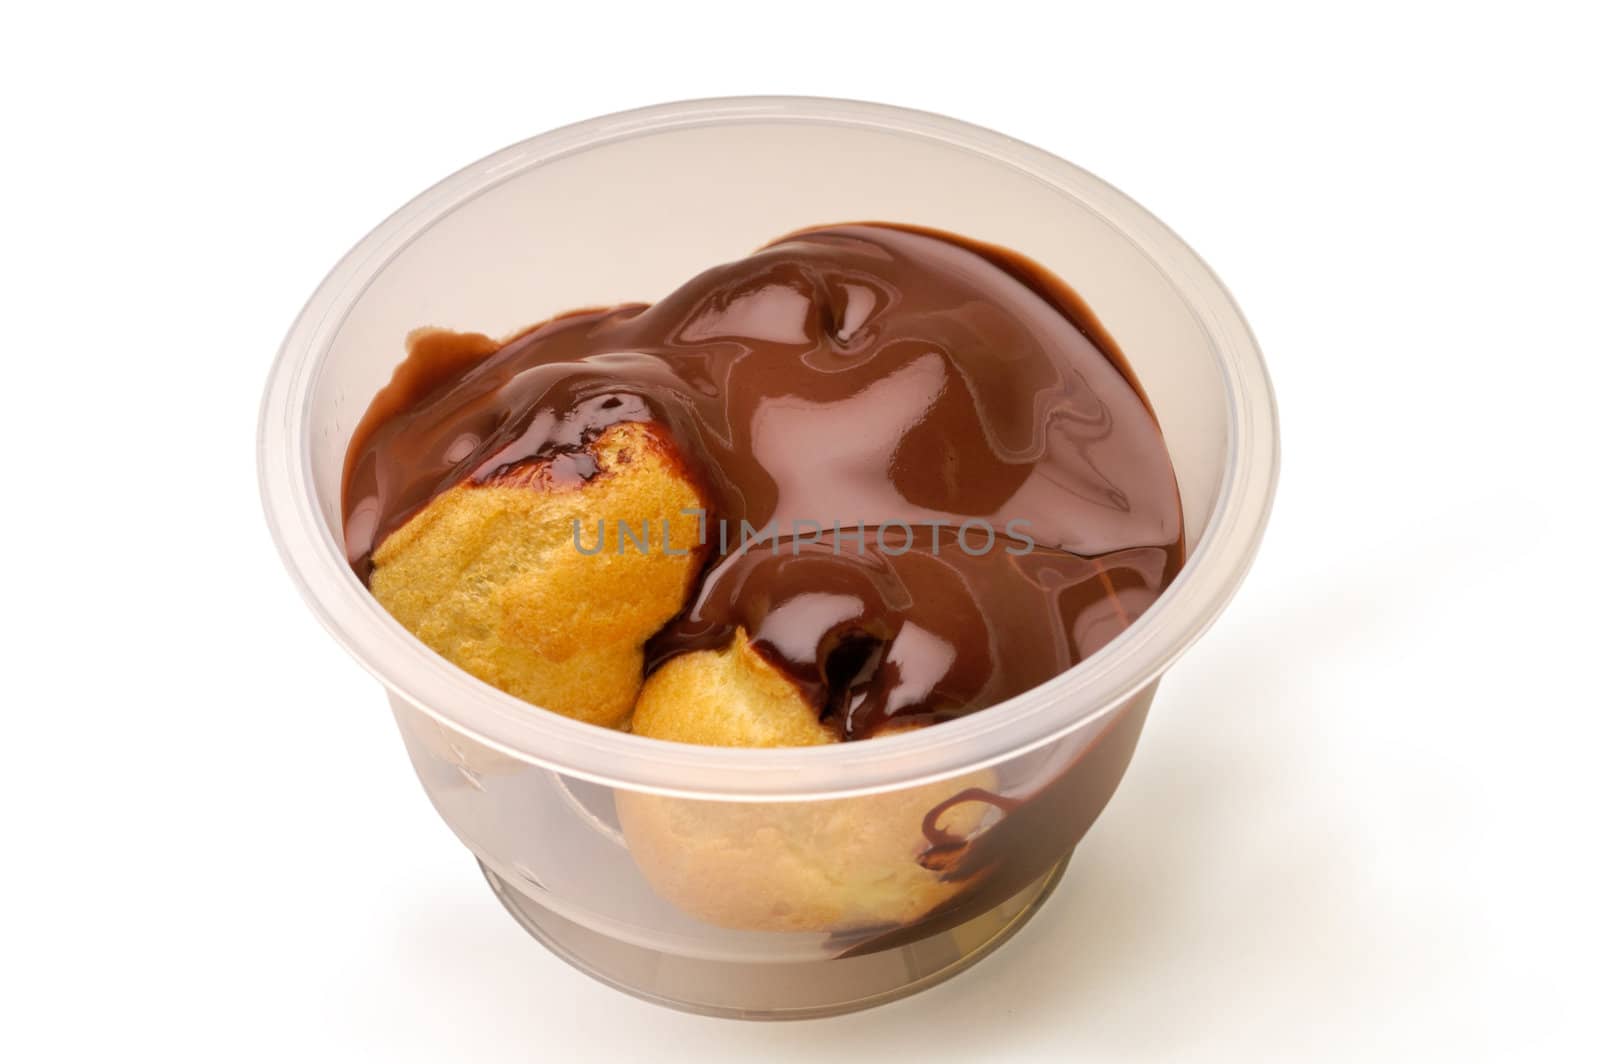 Dessert: profiterole with clipping path by Laborer